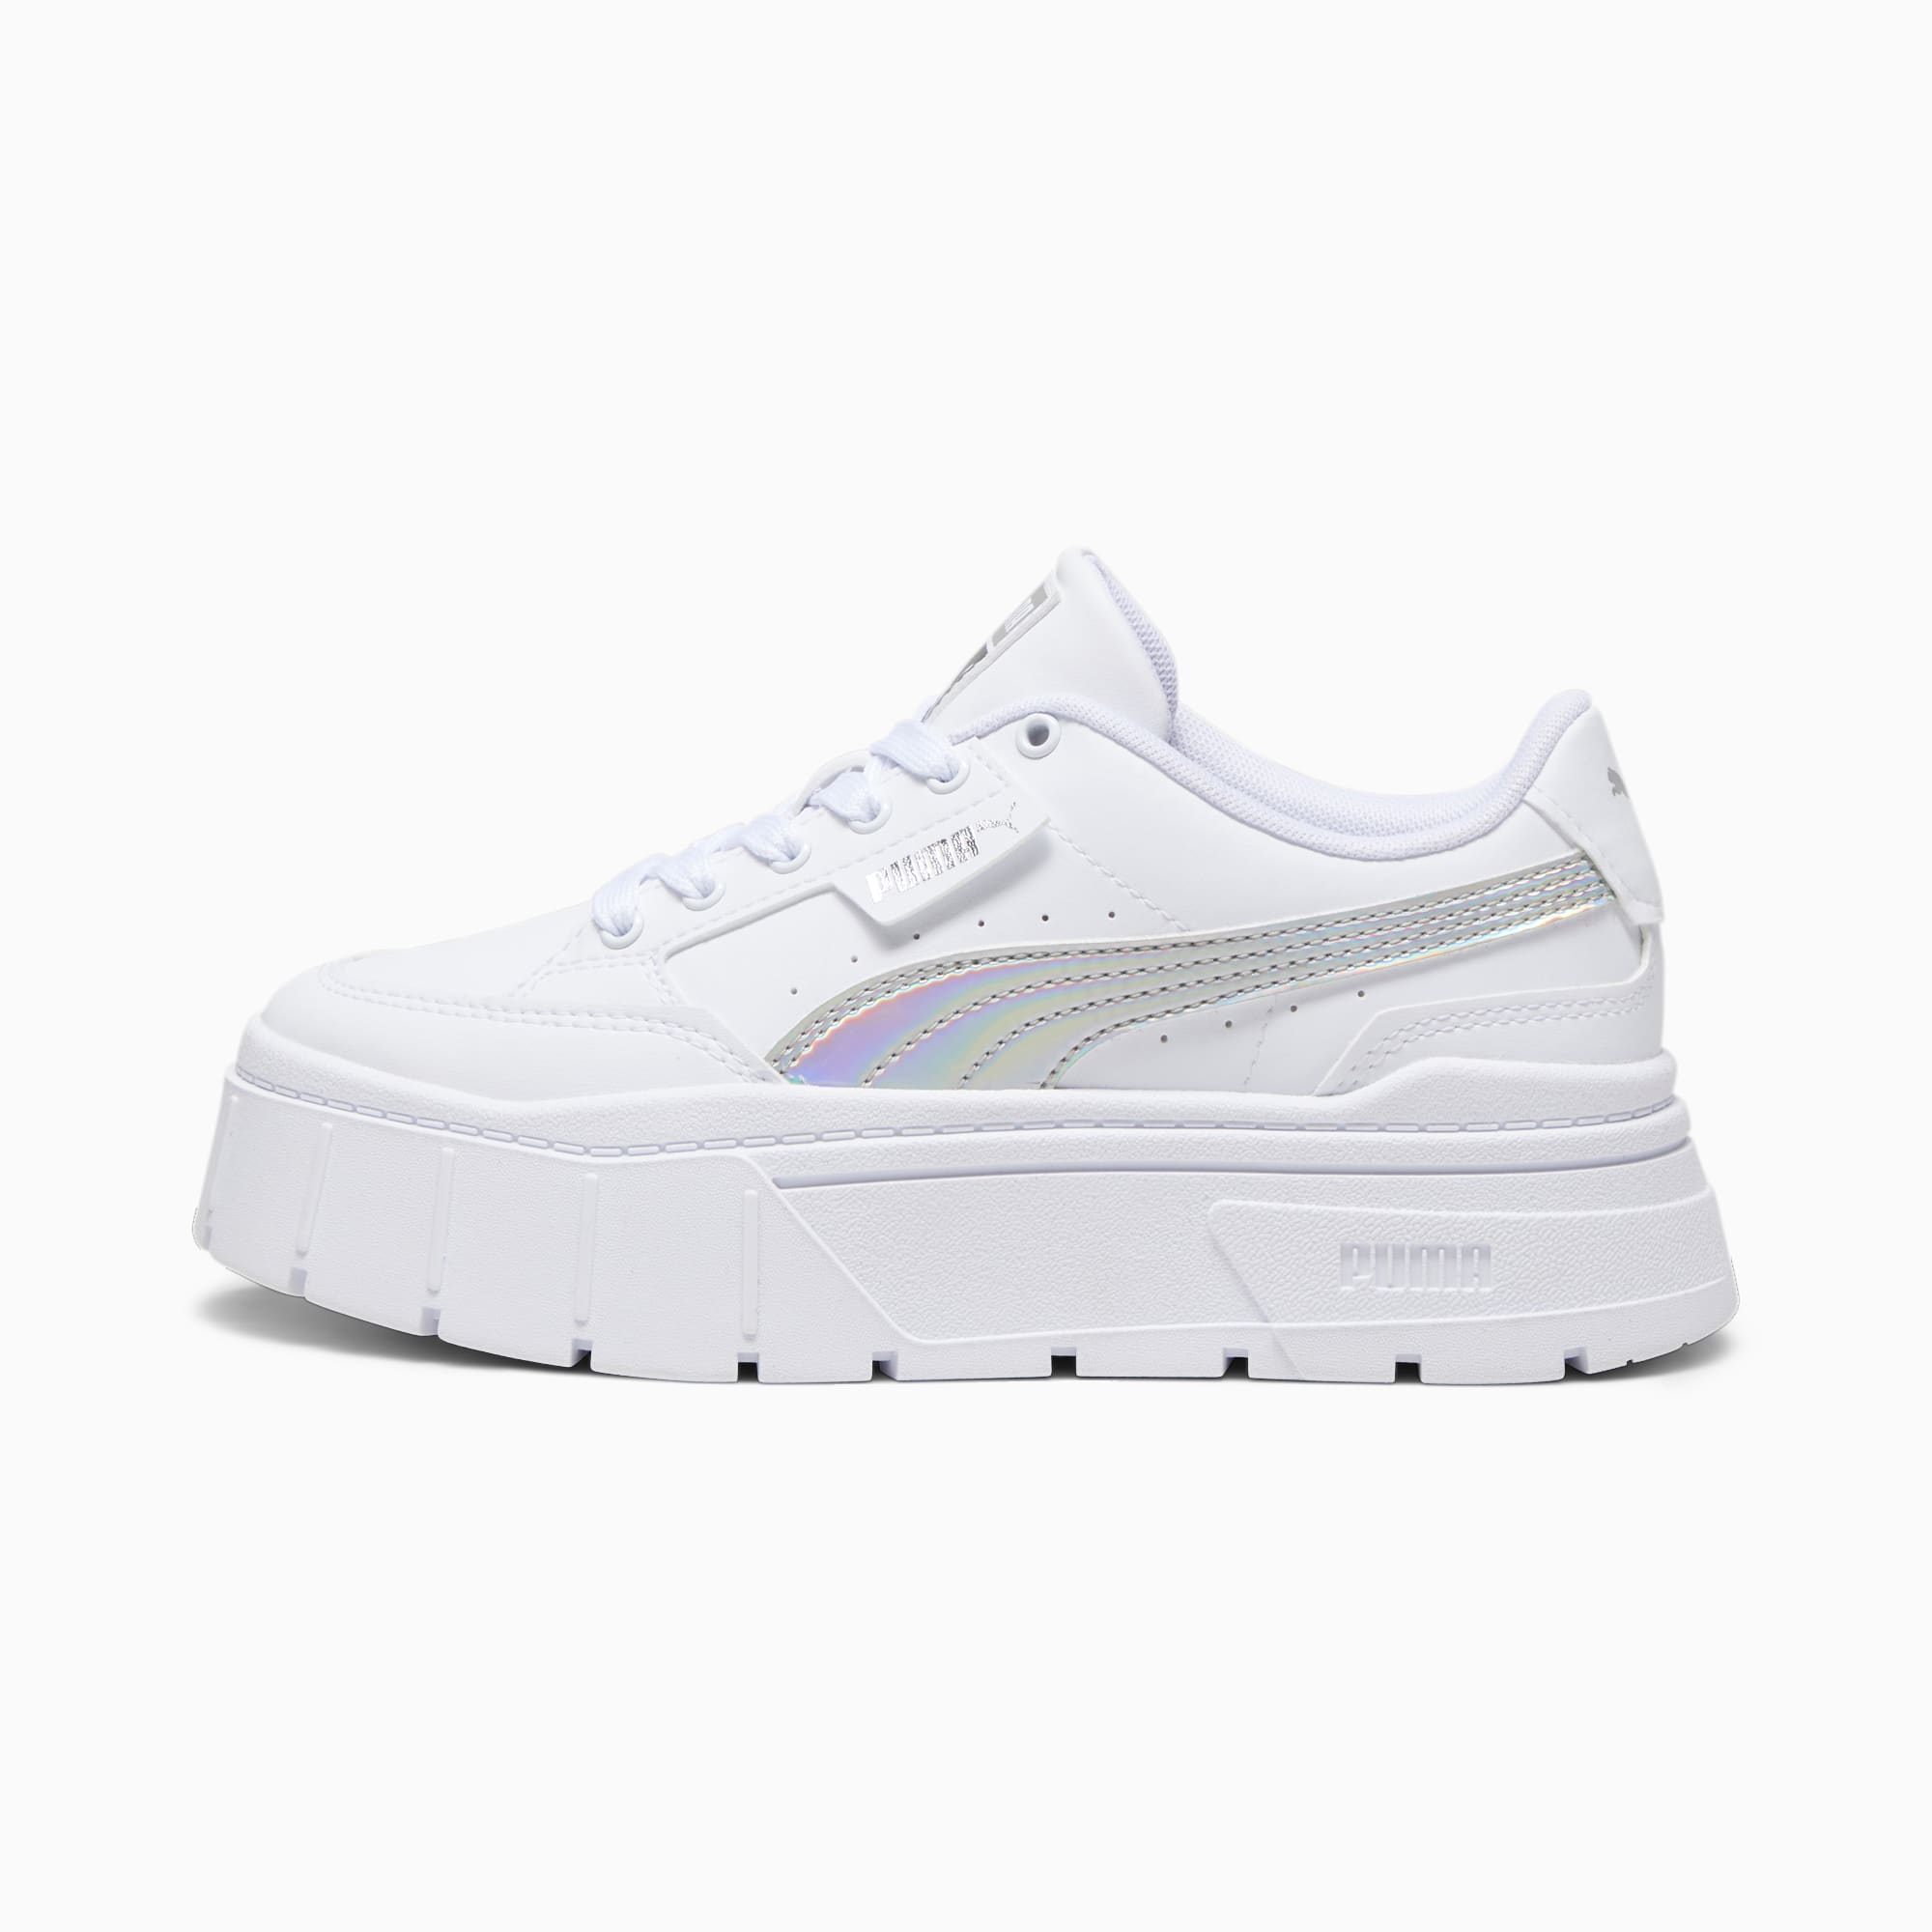 PUMA Mayze Stack Iridescent Youth Sneakers, White/Silver